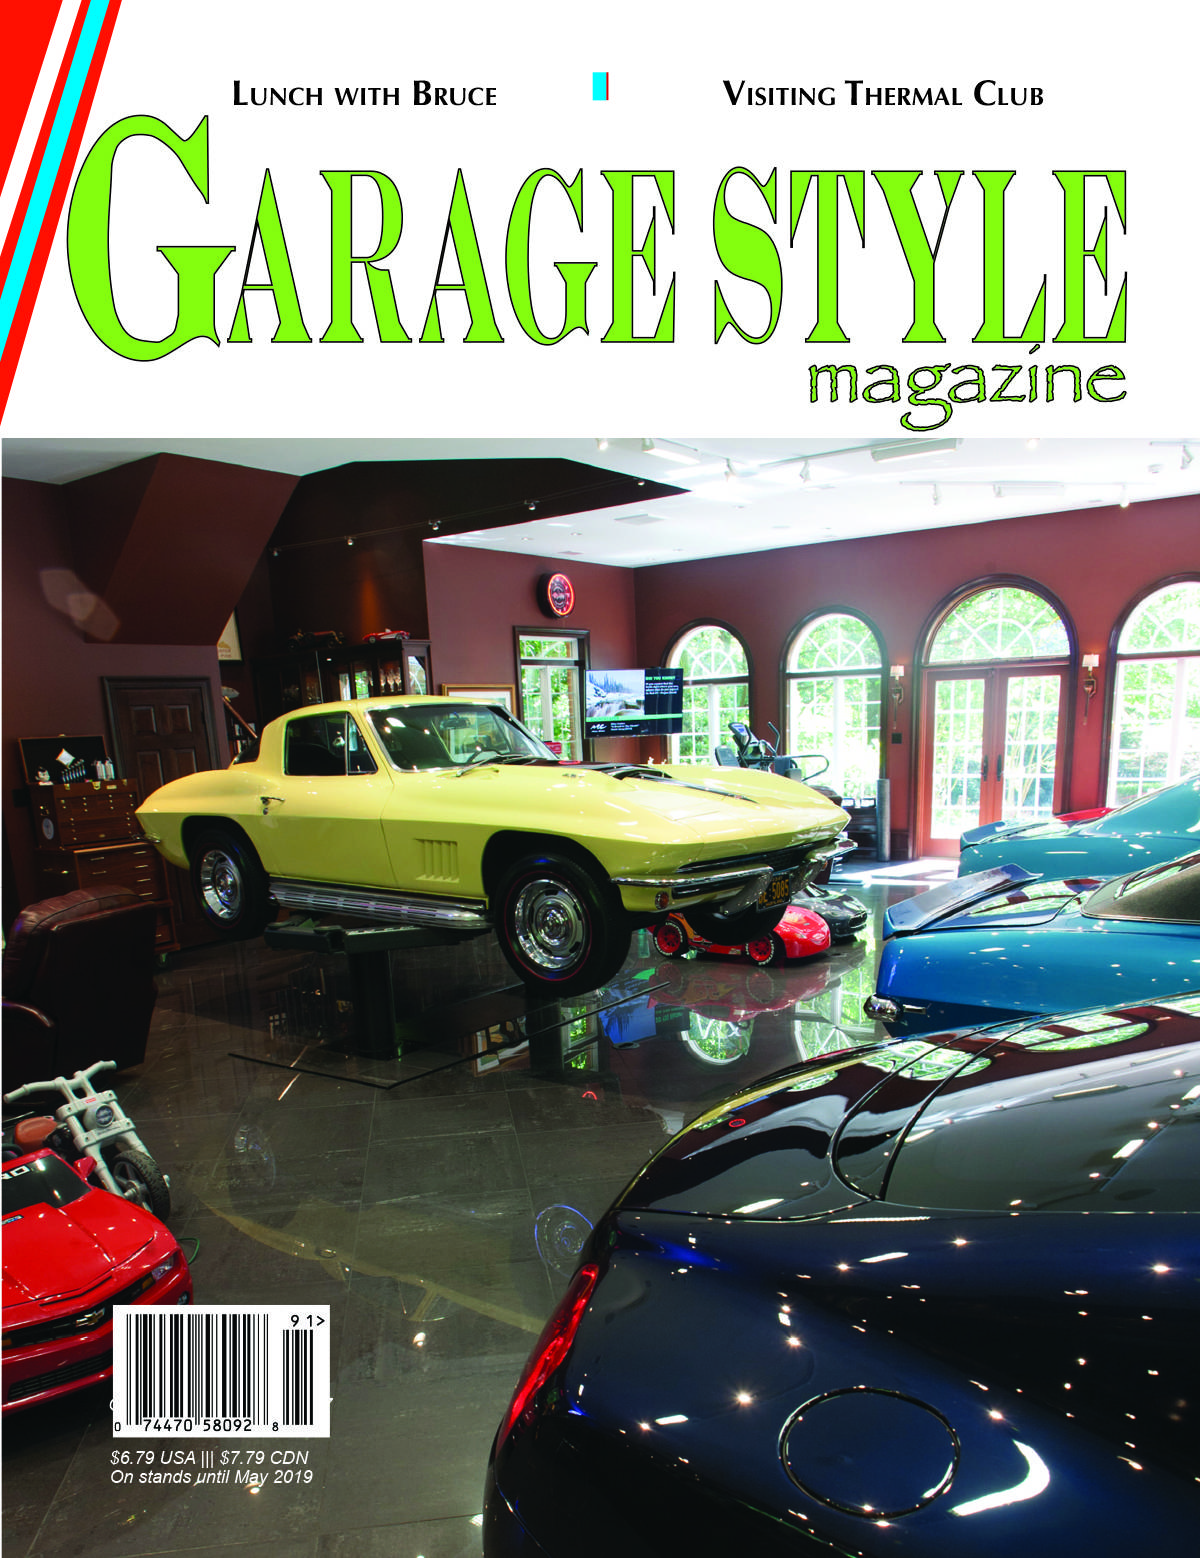 Issue 44, Cover